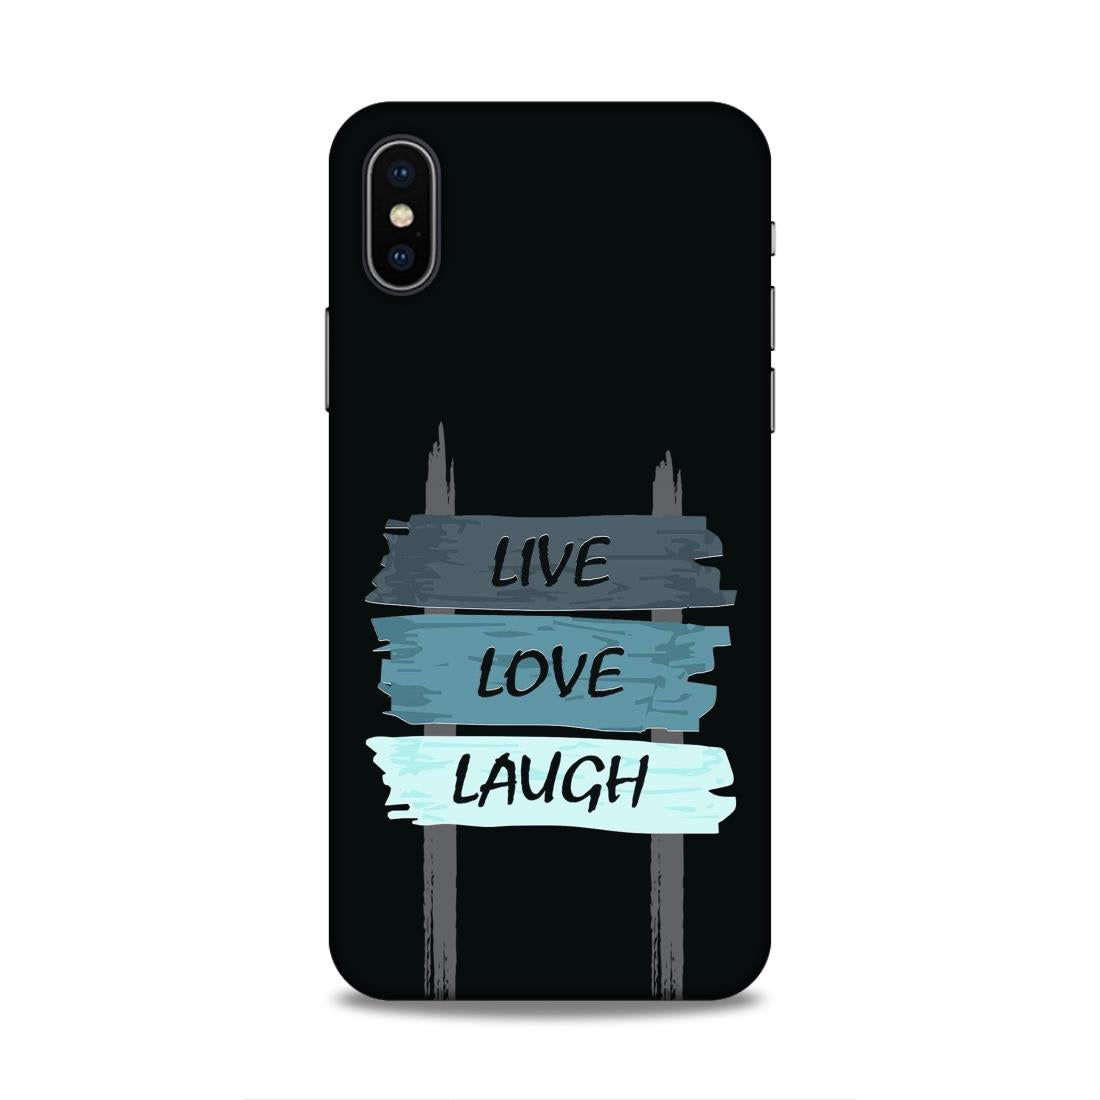 Live Love Laugh Hard Back Case For Apple iPhone X/XS